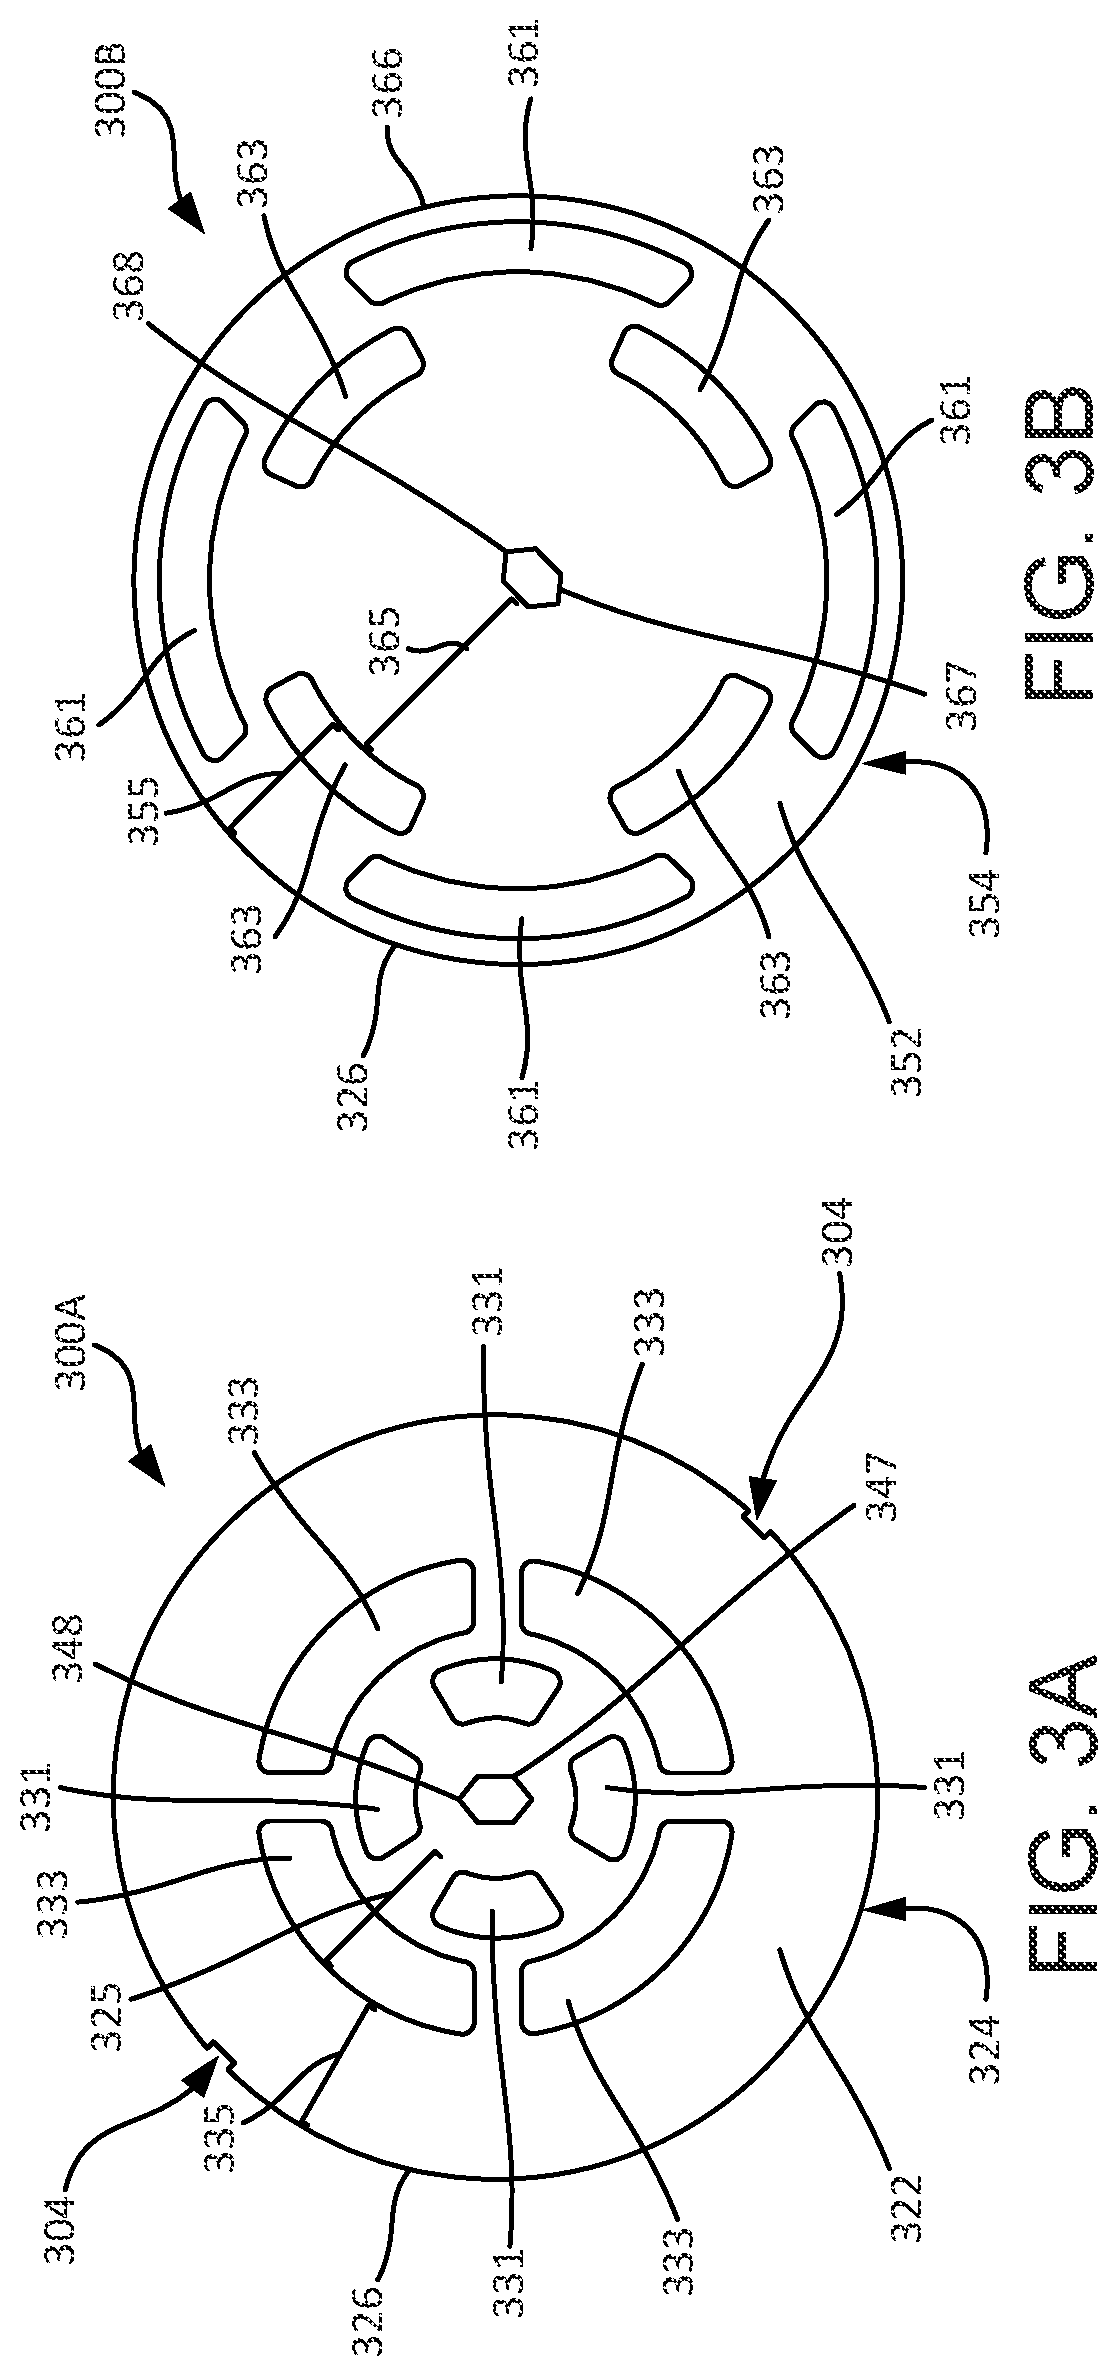 Contaminant trap system for a reactor system